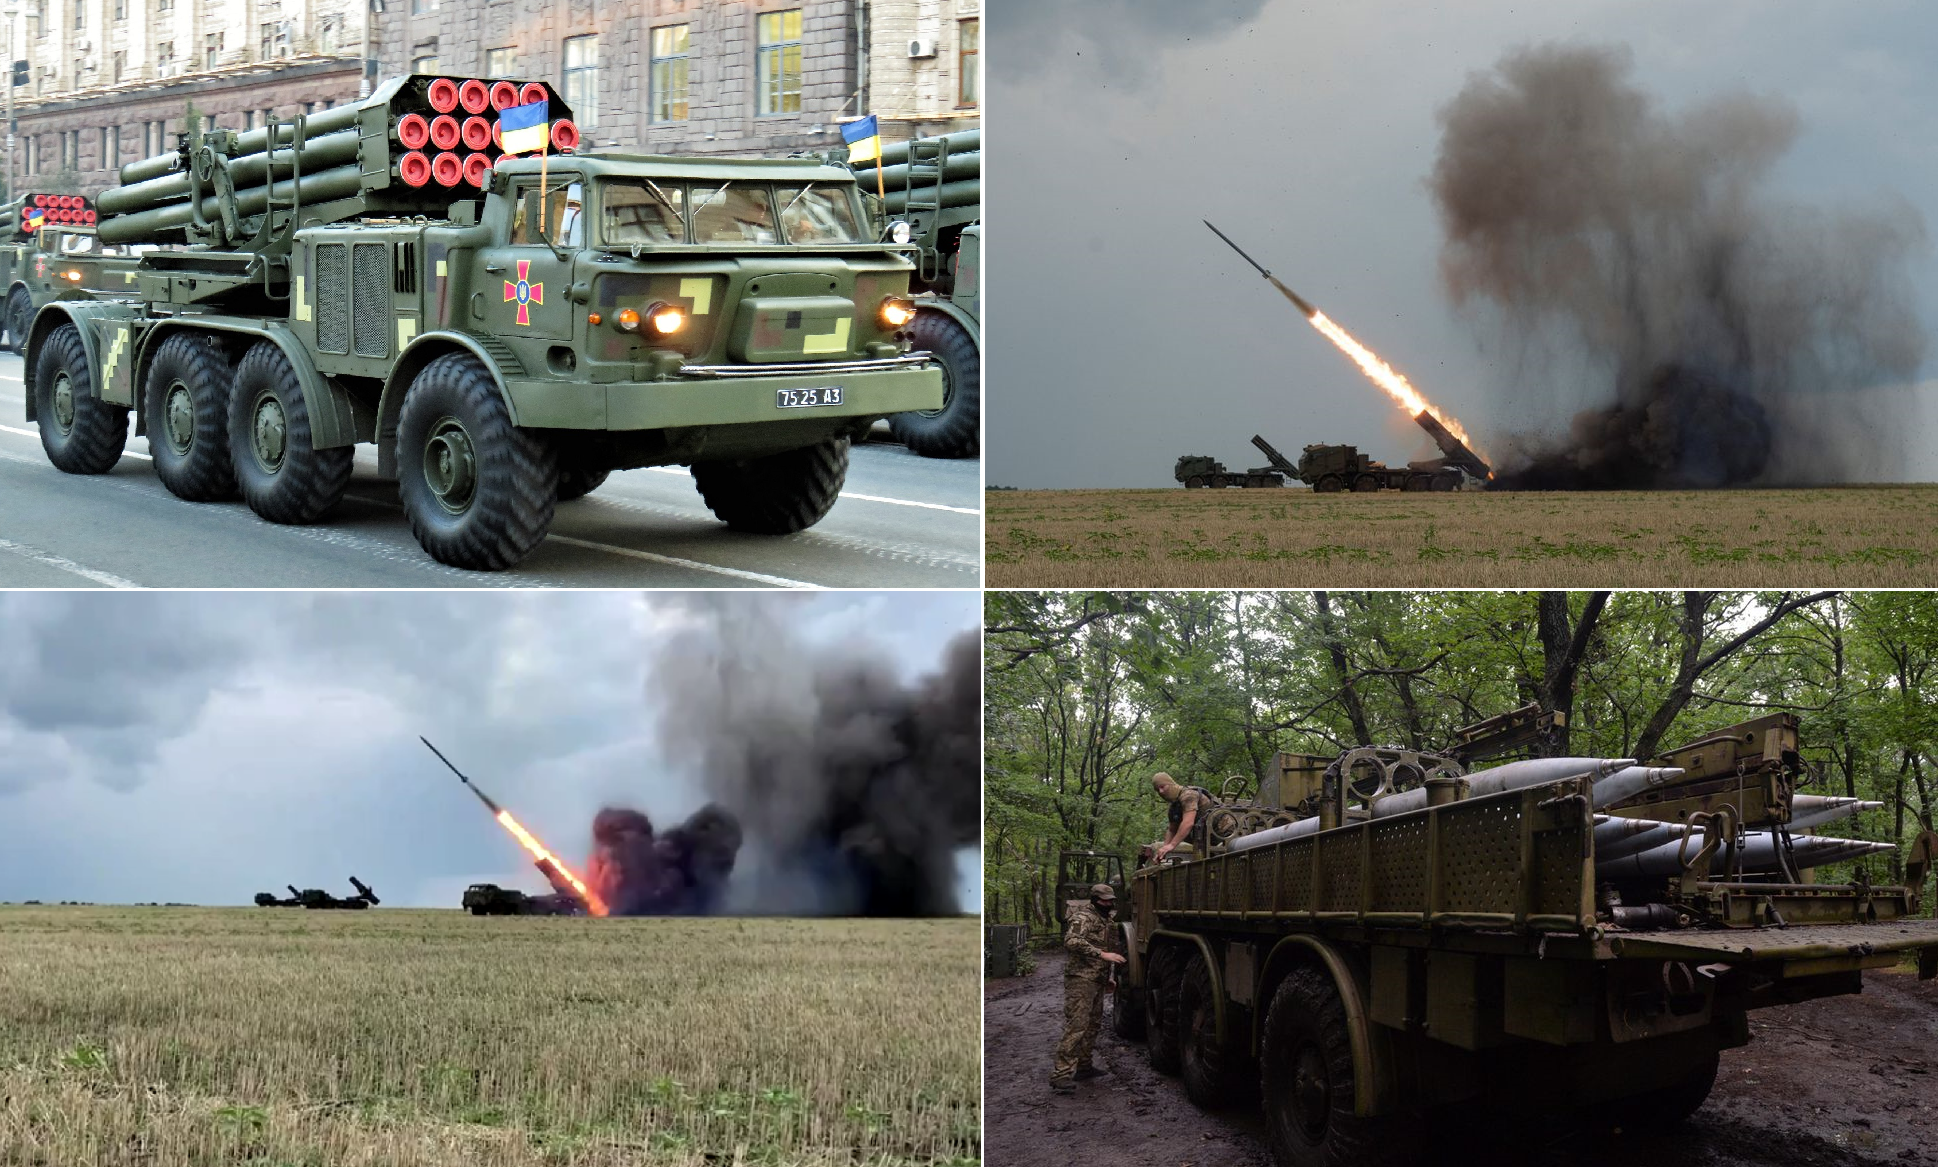 Ukrainian Uragan MLRS launches missiles next to two Bureviy rocket systems on Tatra T815-7 chassis